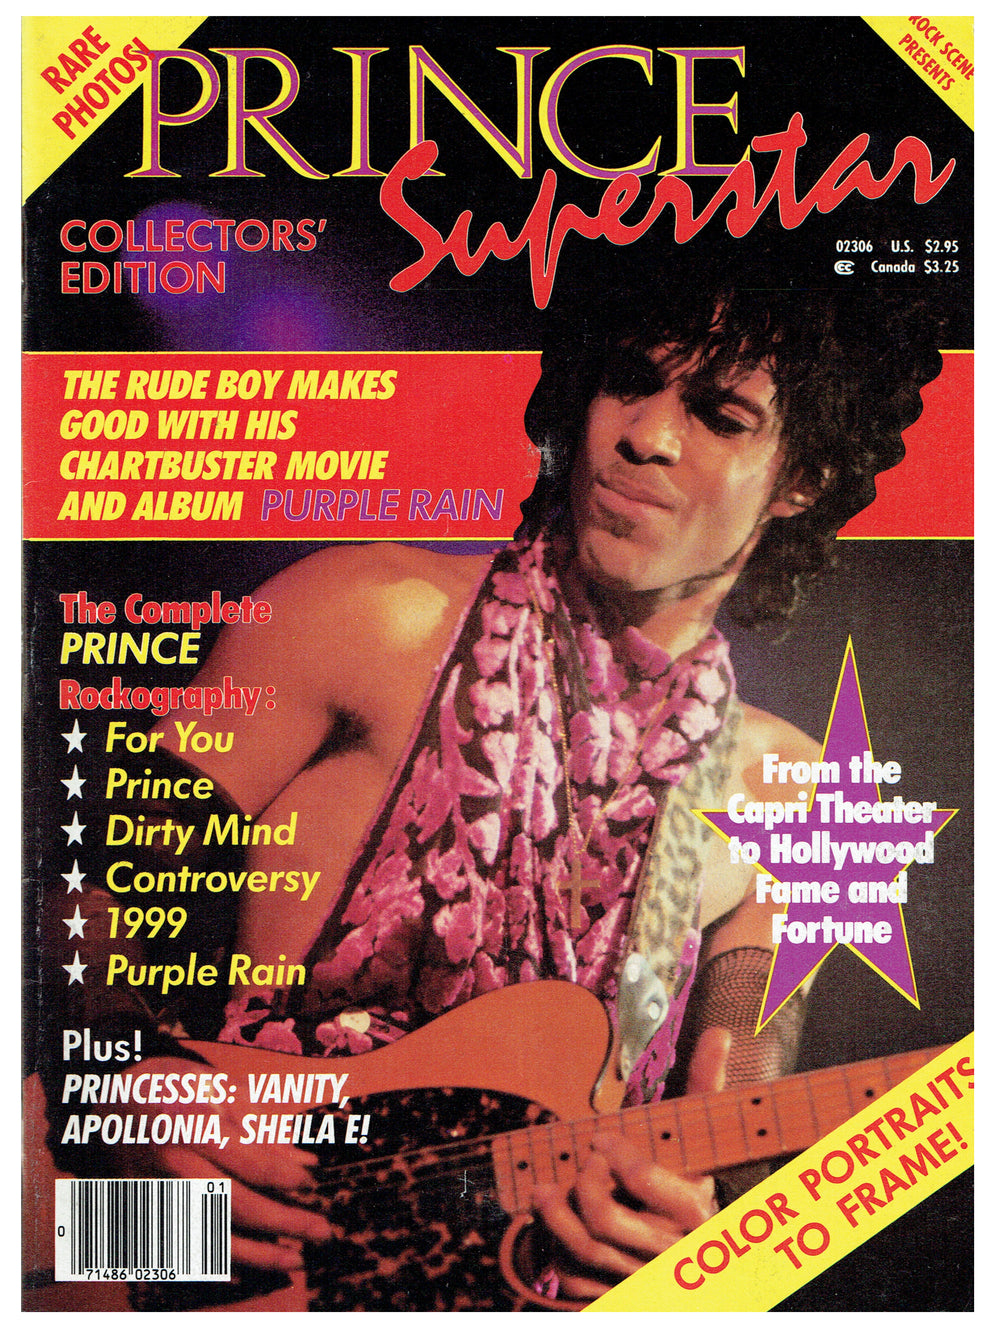 Prince –  Magazine Special Superstar Collectors 76 Pages Printed In USA 1984 Preloved: 1984